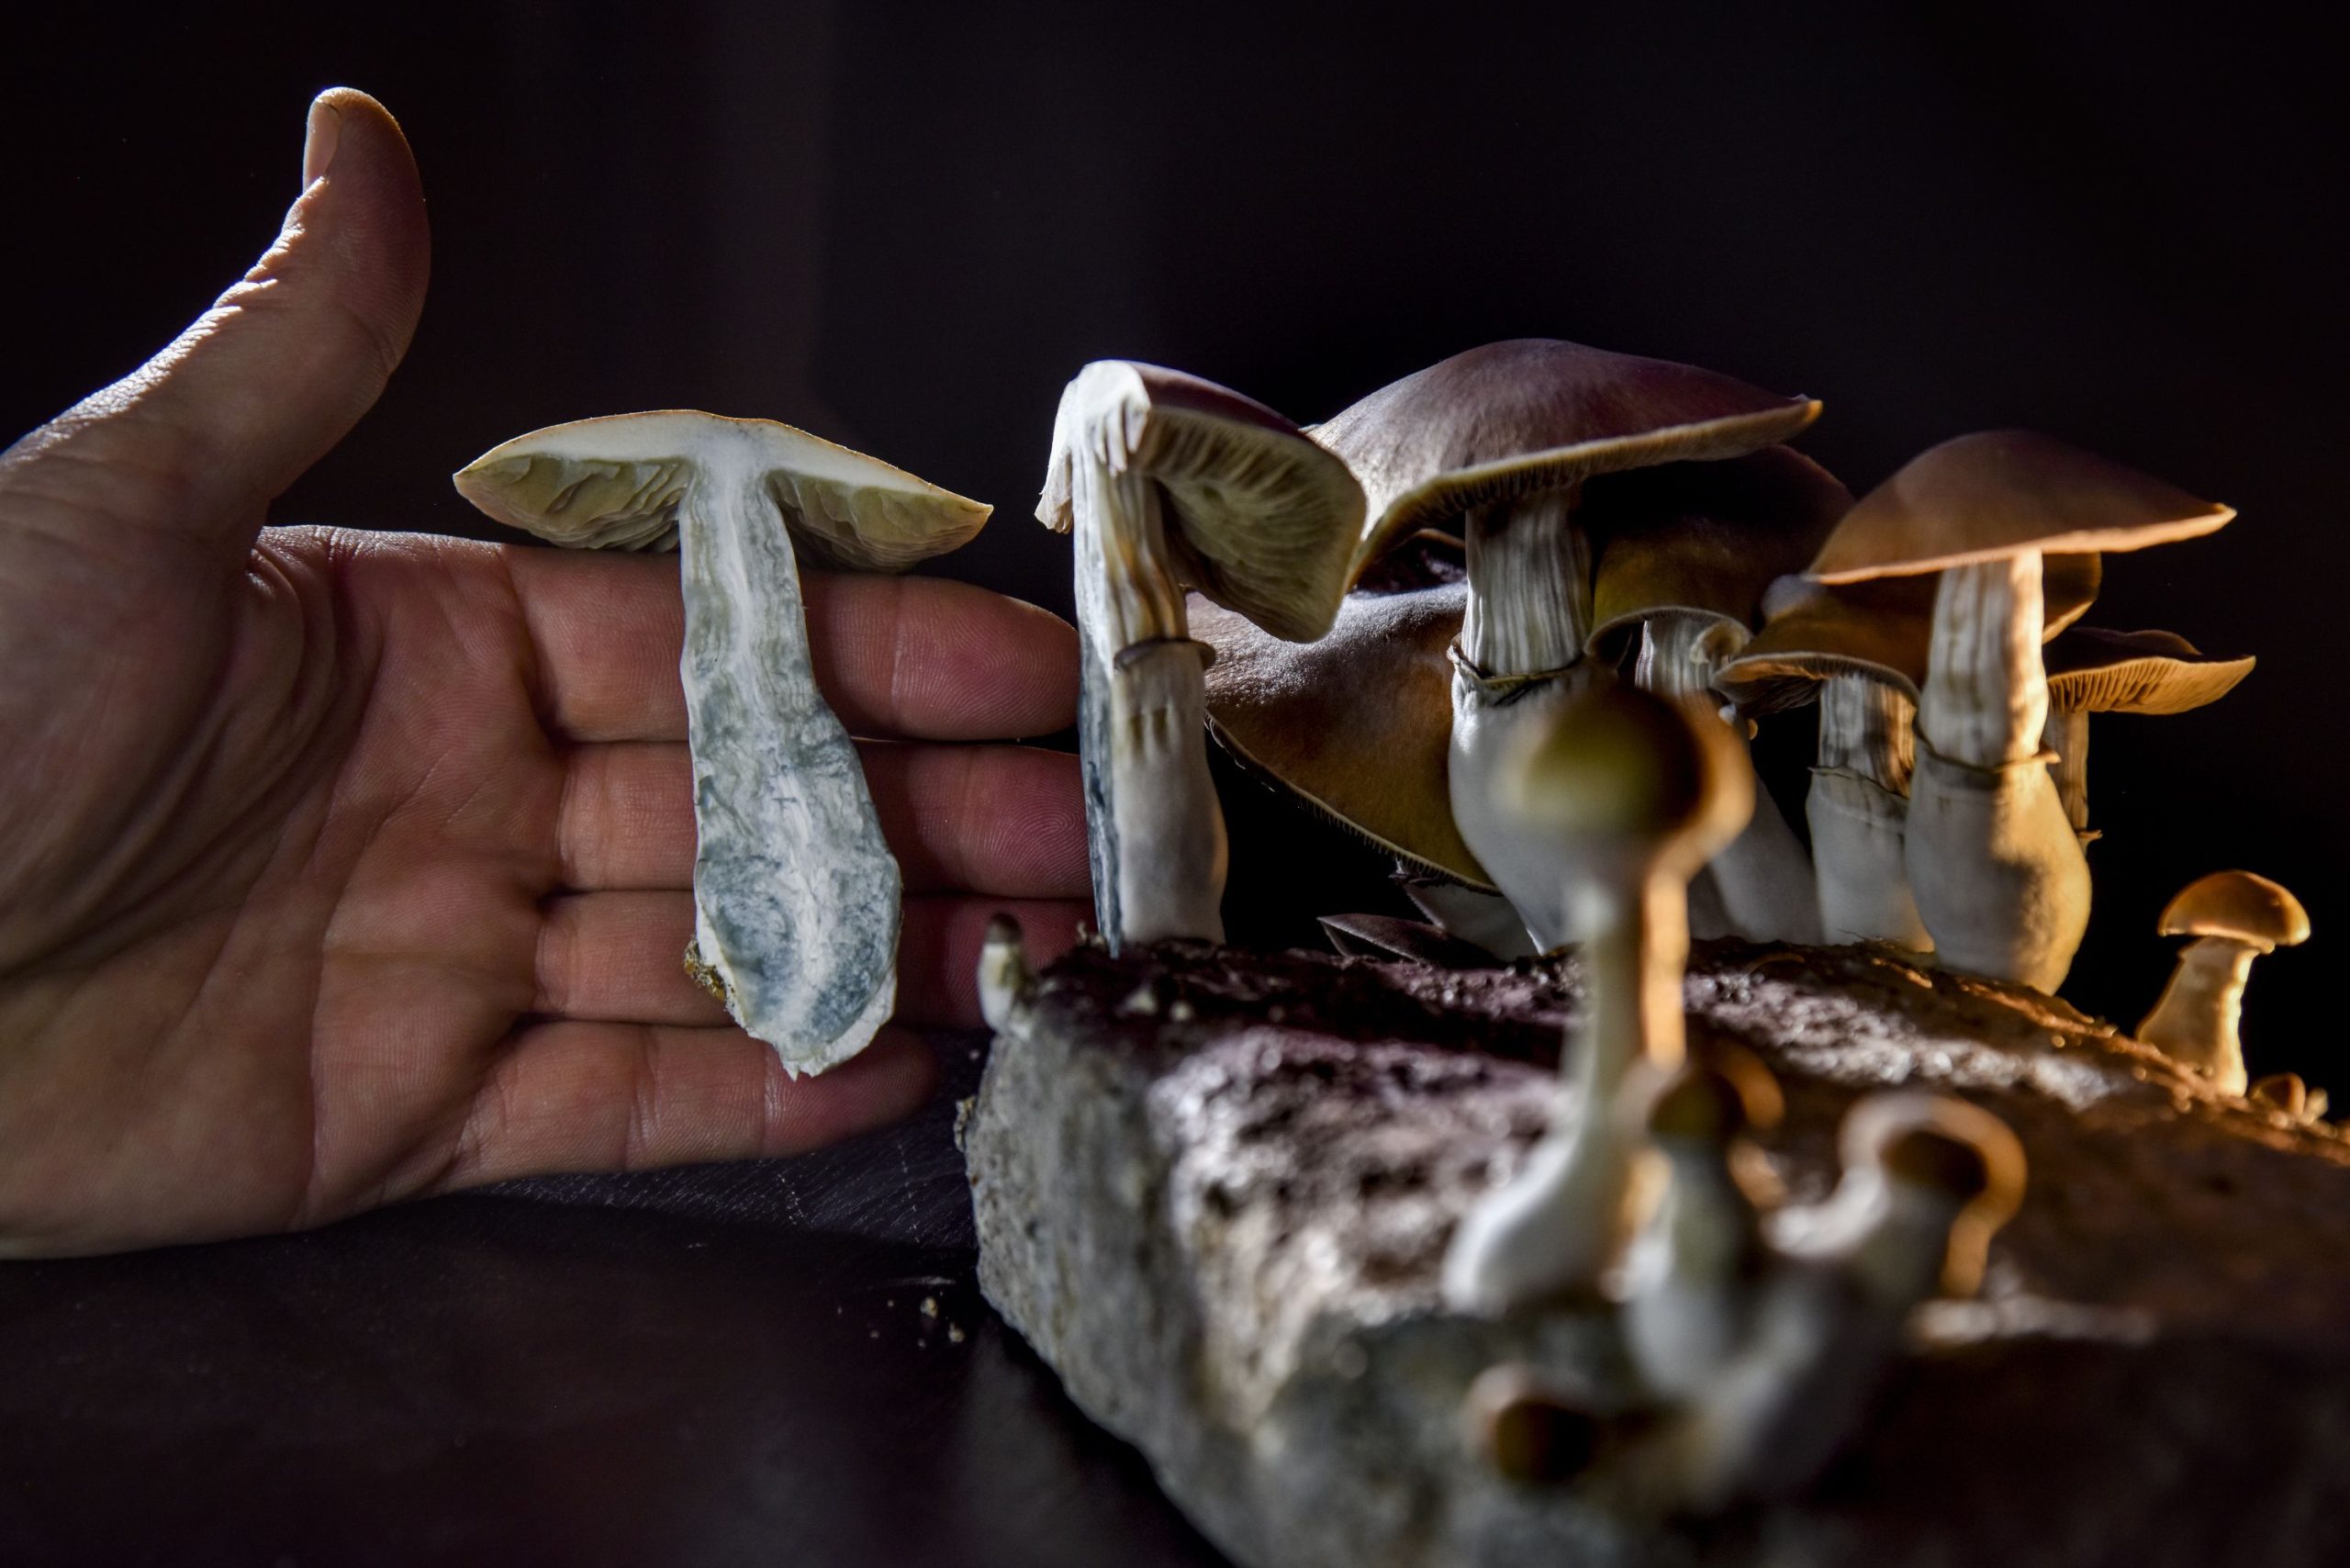 The The best places to purchase shrooms dc within a strict budget